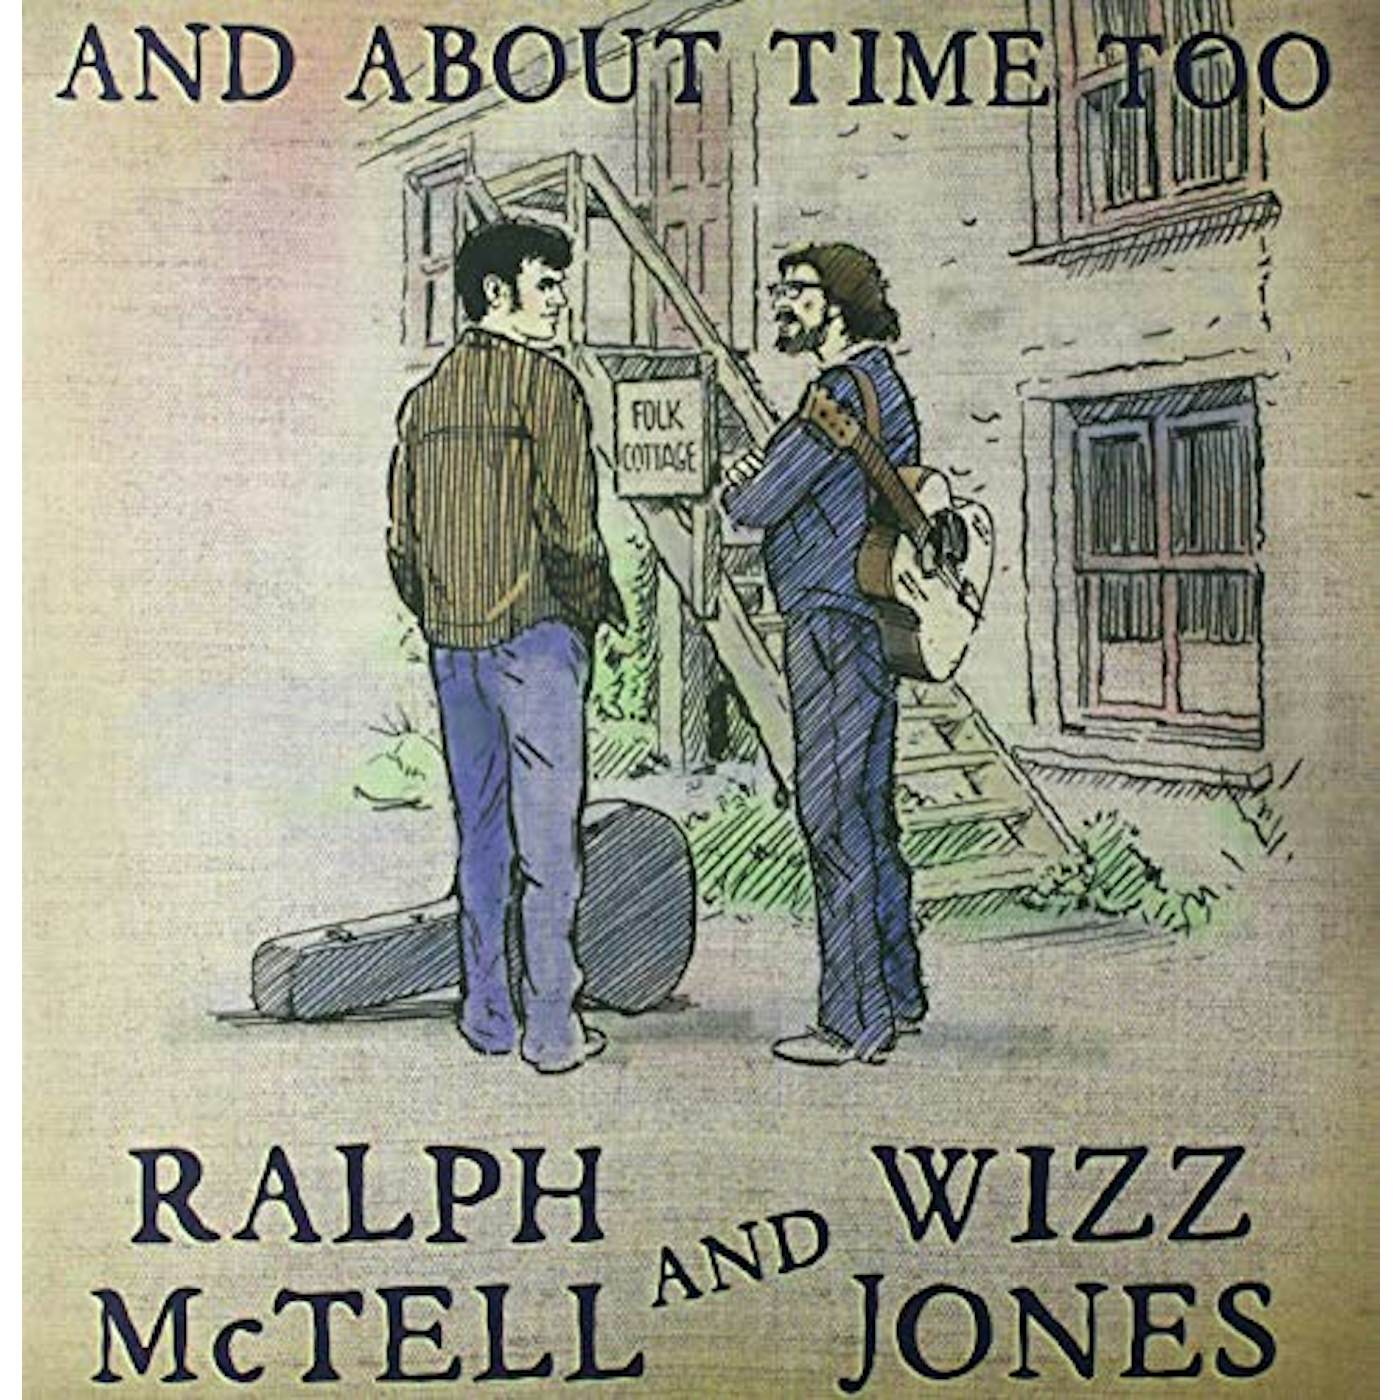 Ralph Mctell & Wizz Jones & ABOUT TIME TOO Vinyl Record